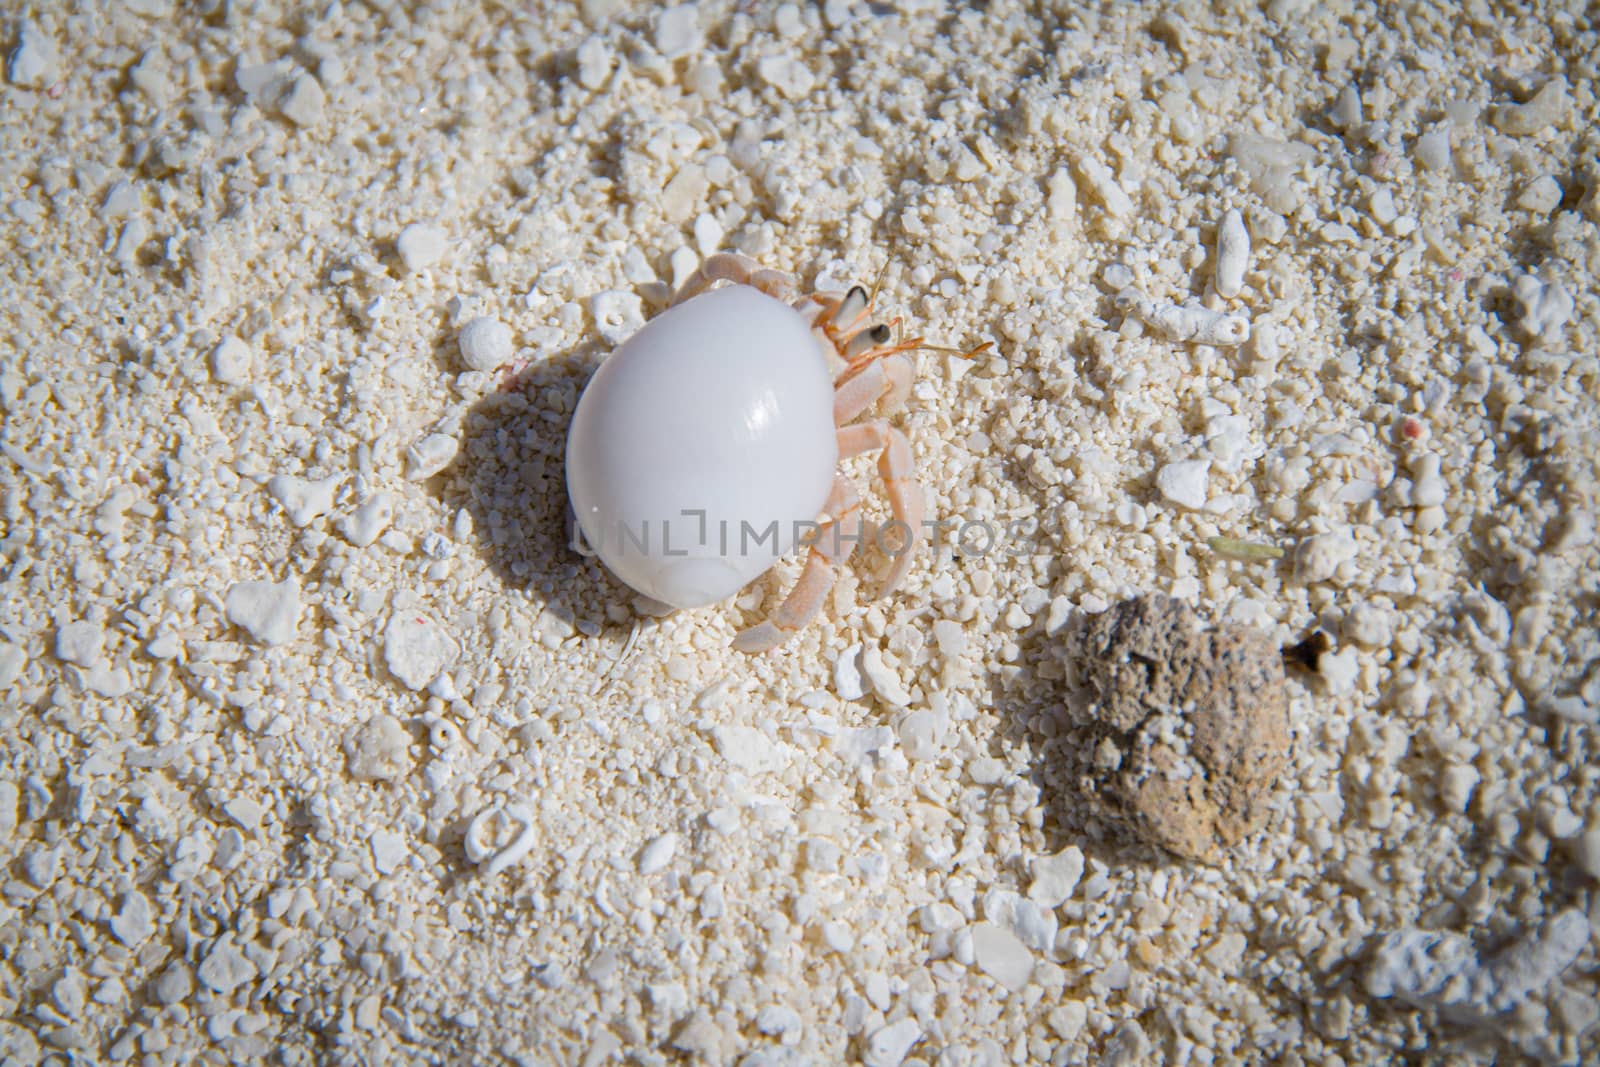 Hermit crab on the beach at Maldives by tanaonte